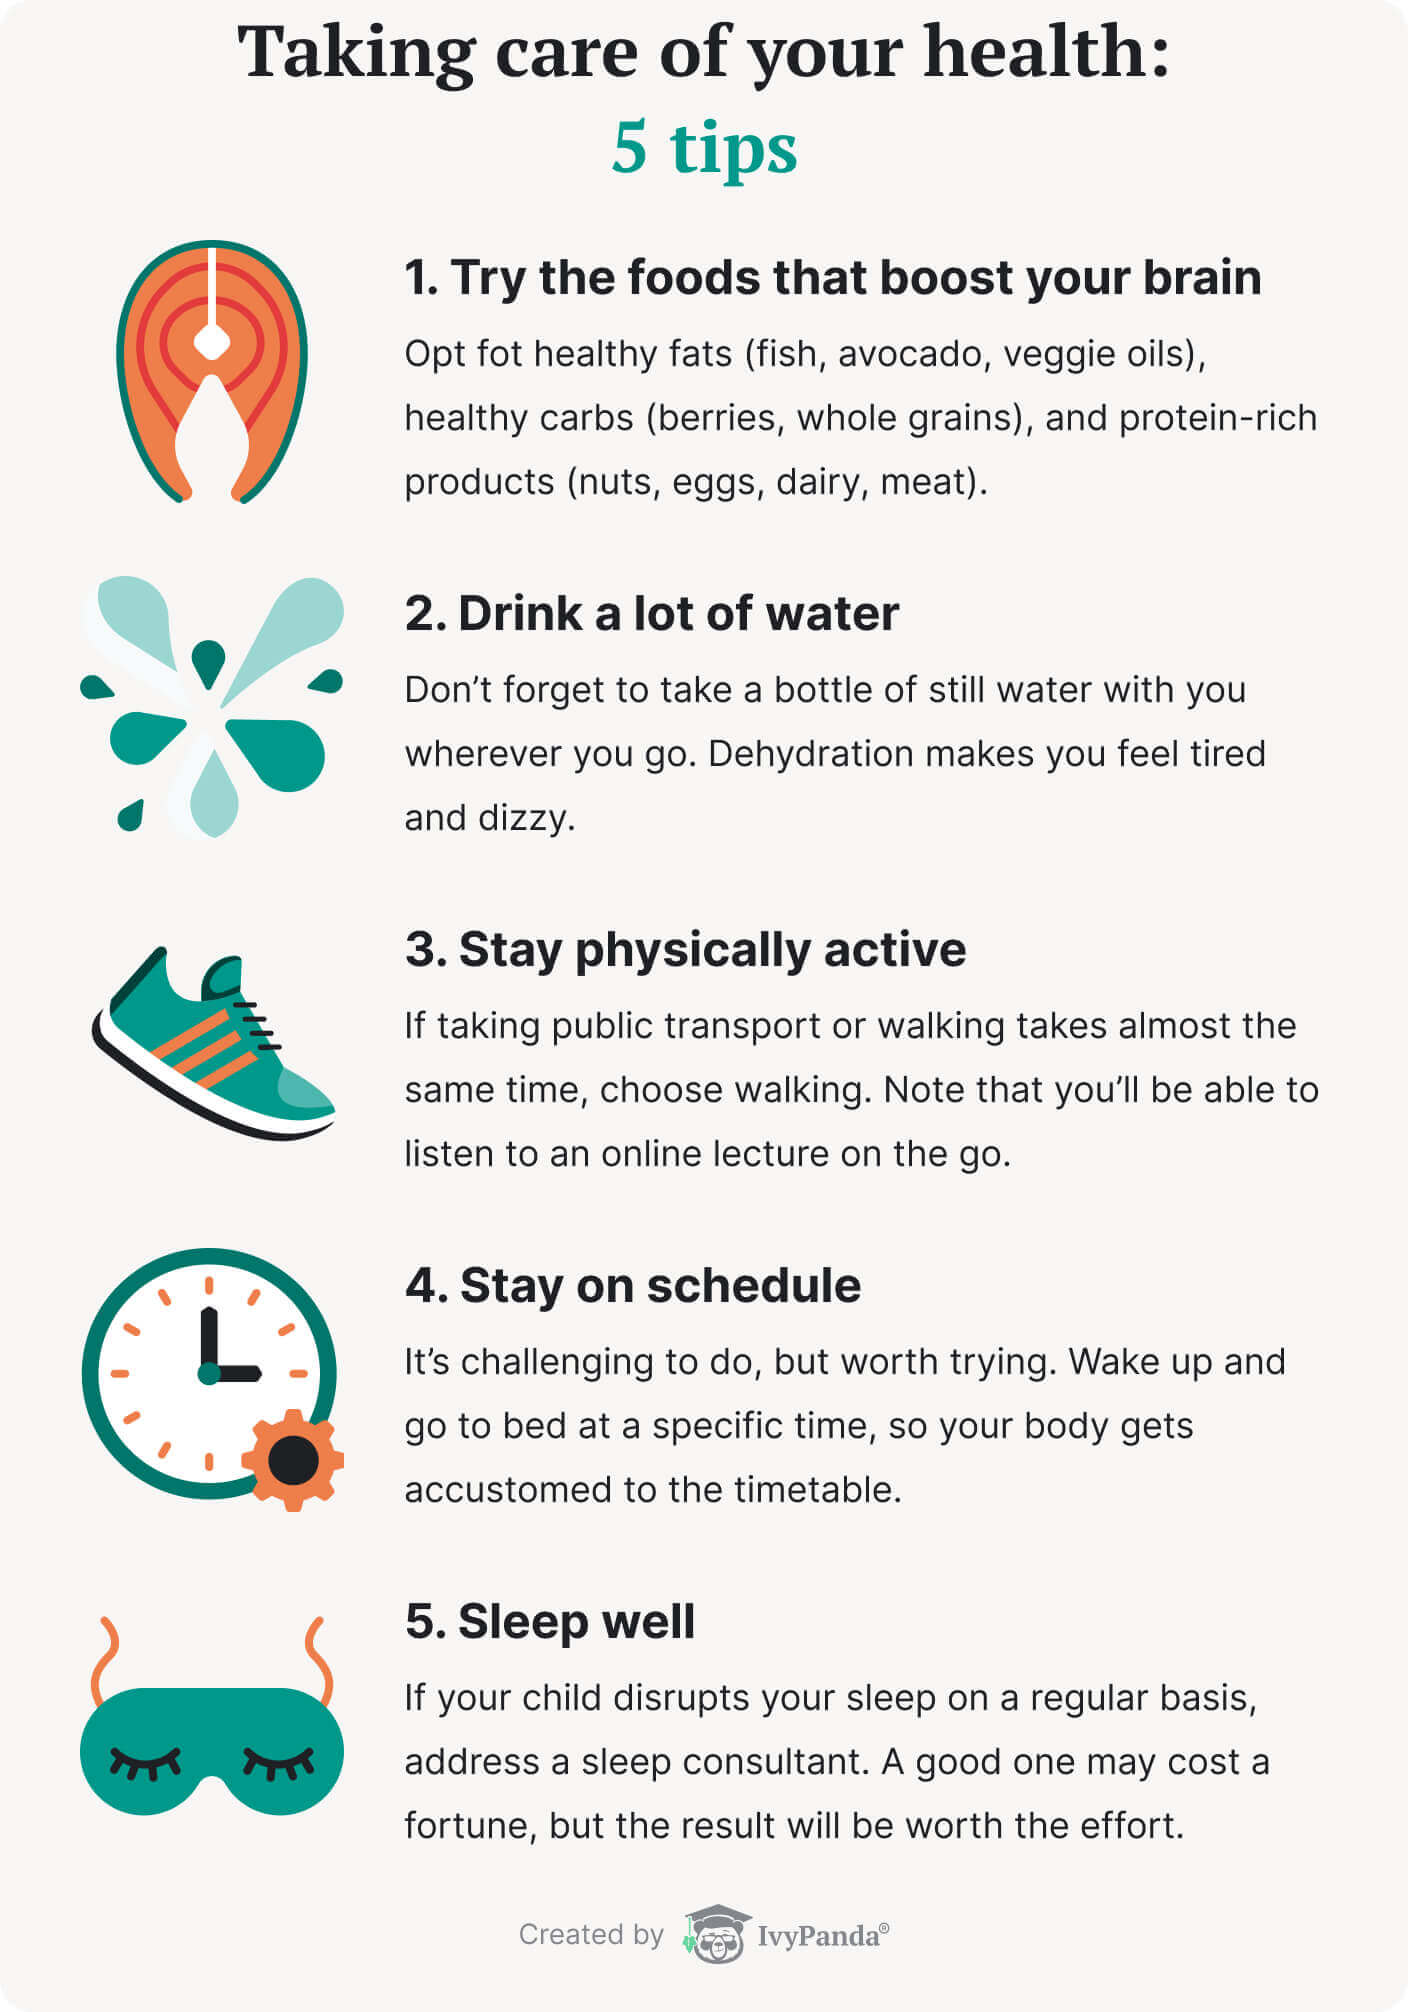 The picture contains 5 tips that will help you take care of your health.